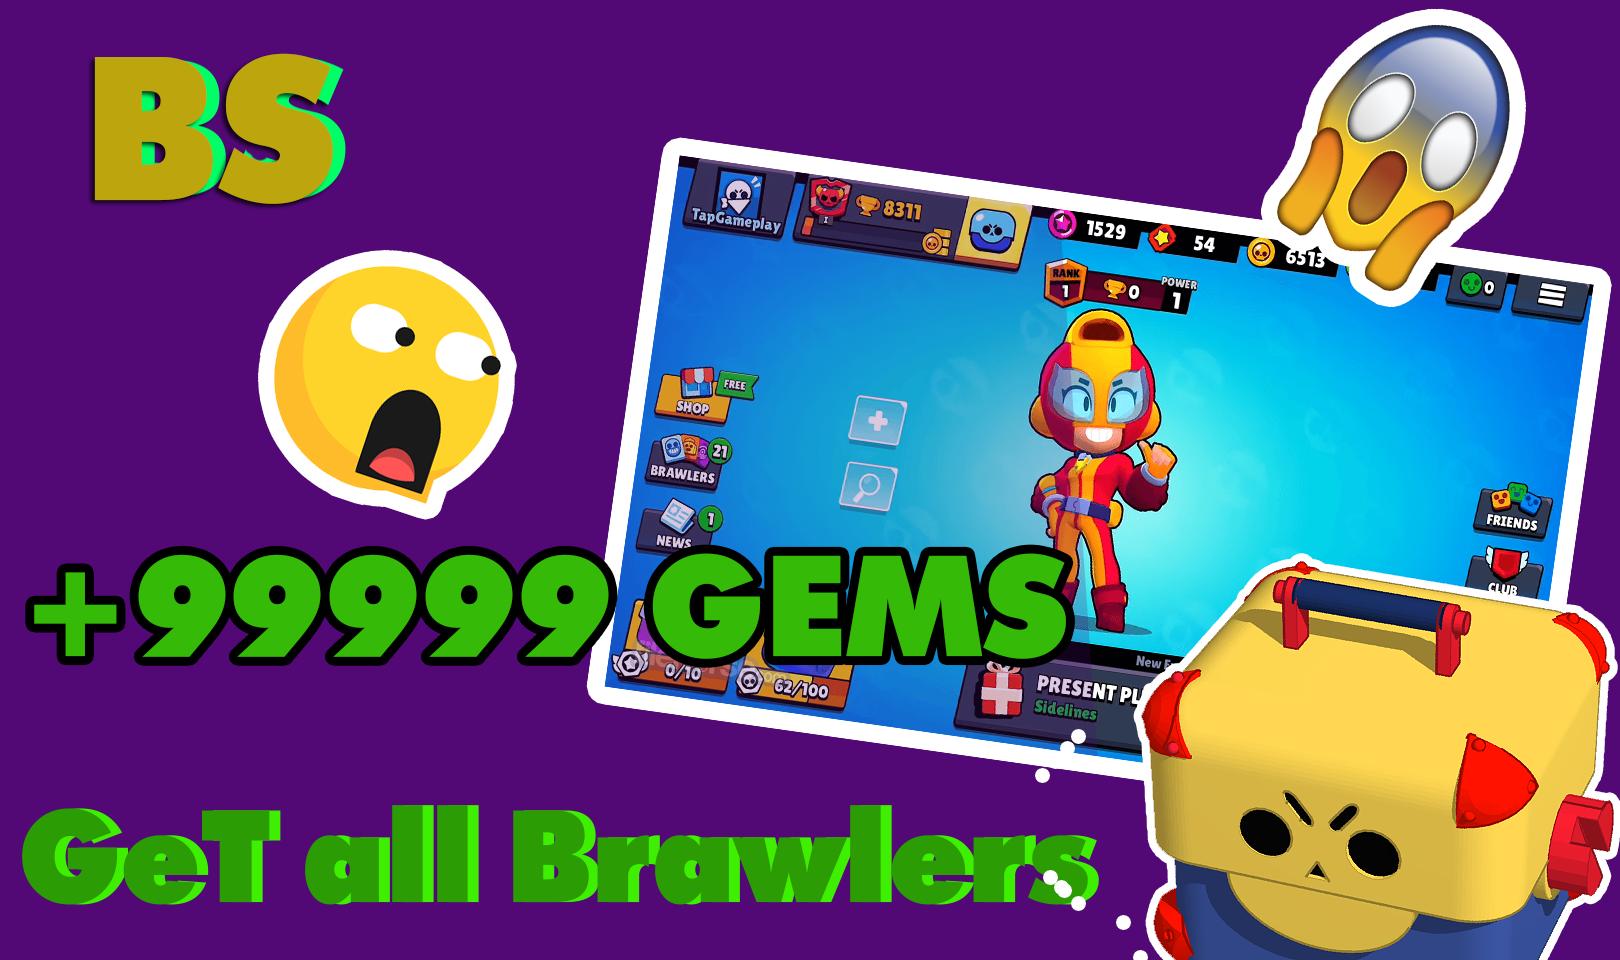 Box Simulator For Brawl Stars Win Heroes And Gems For Android Apk Download - dessin gem brawl stars